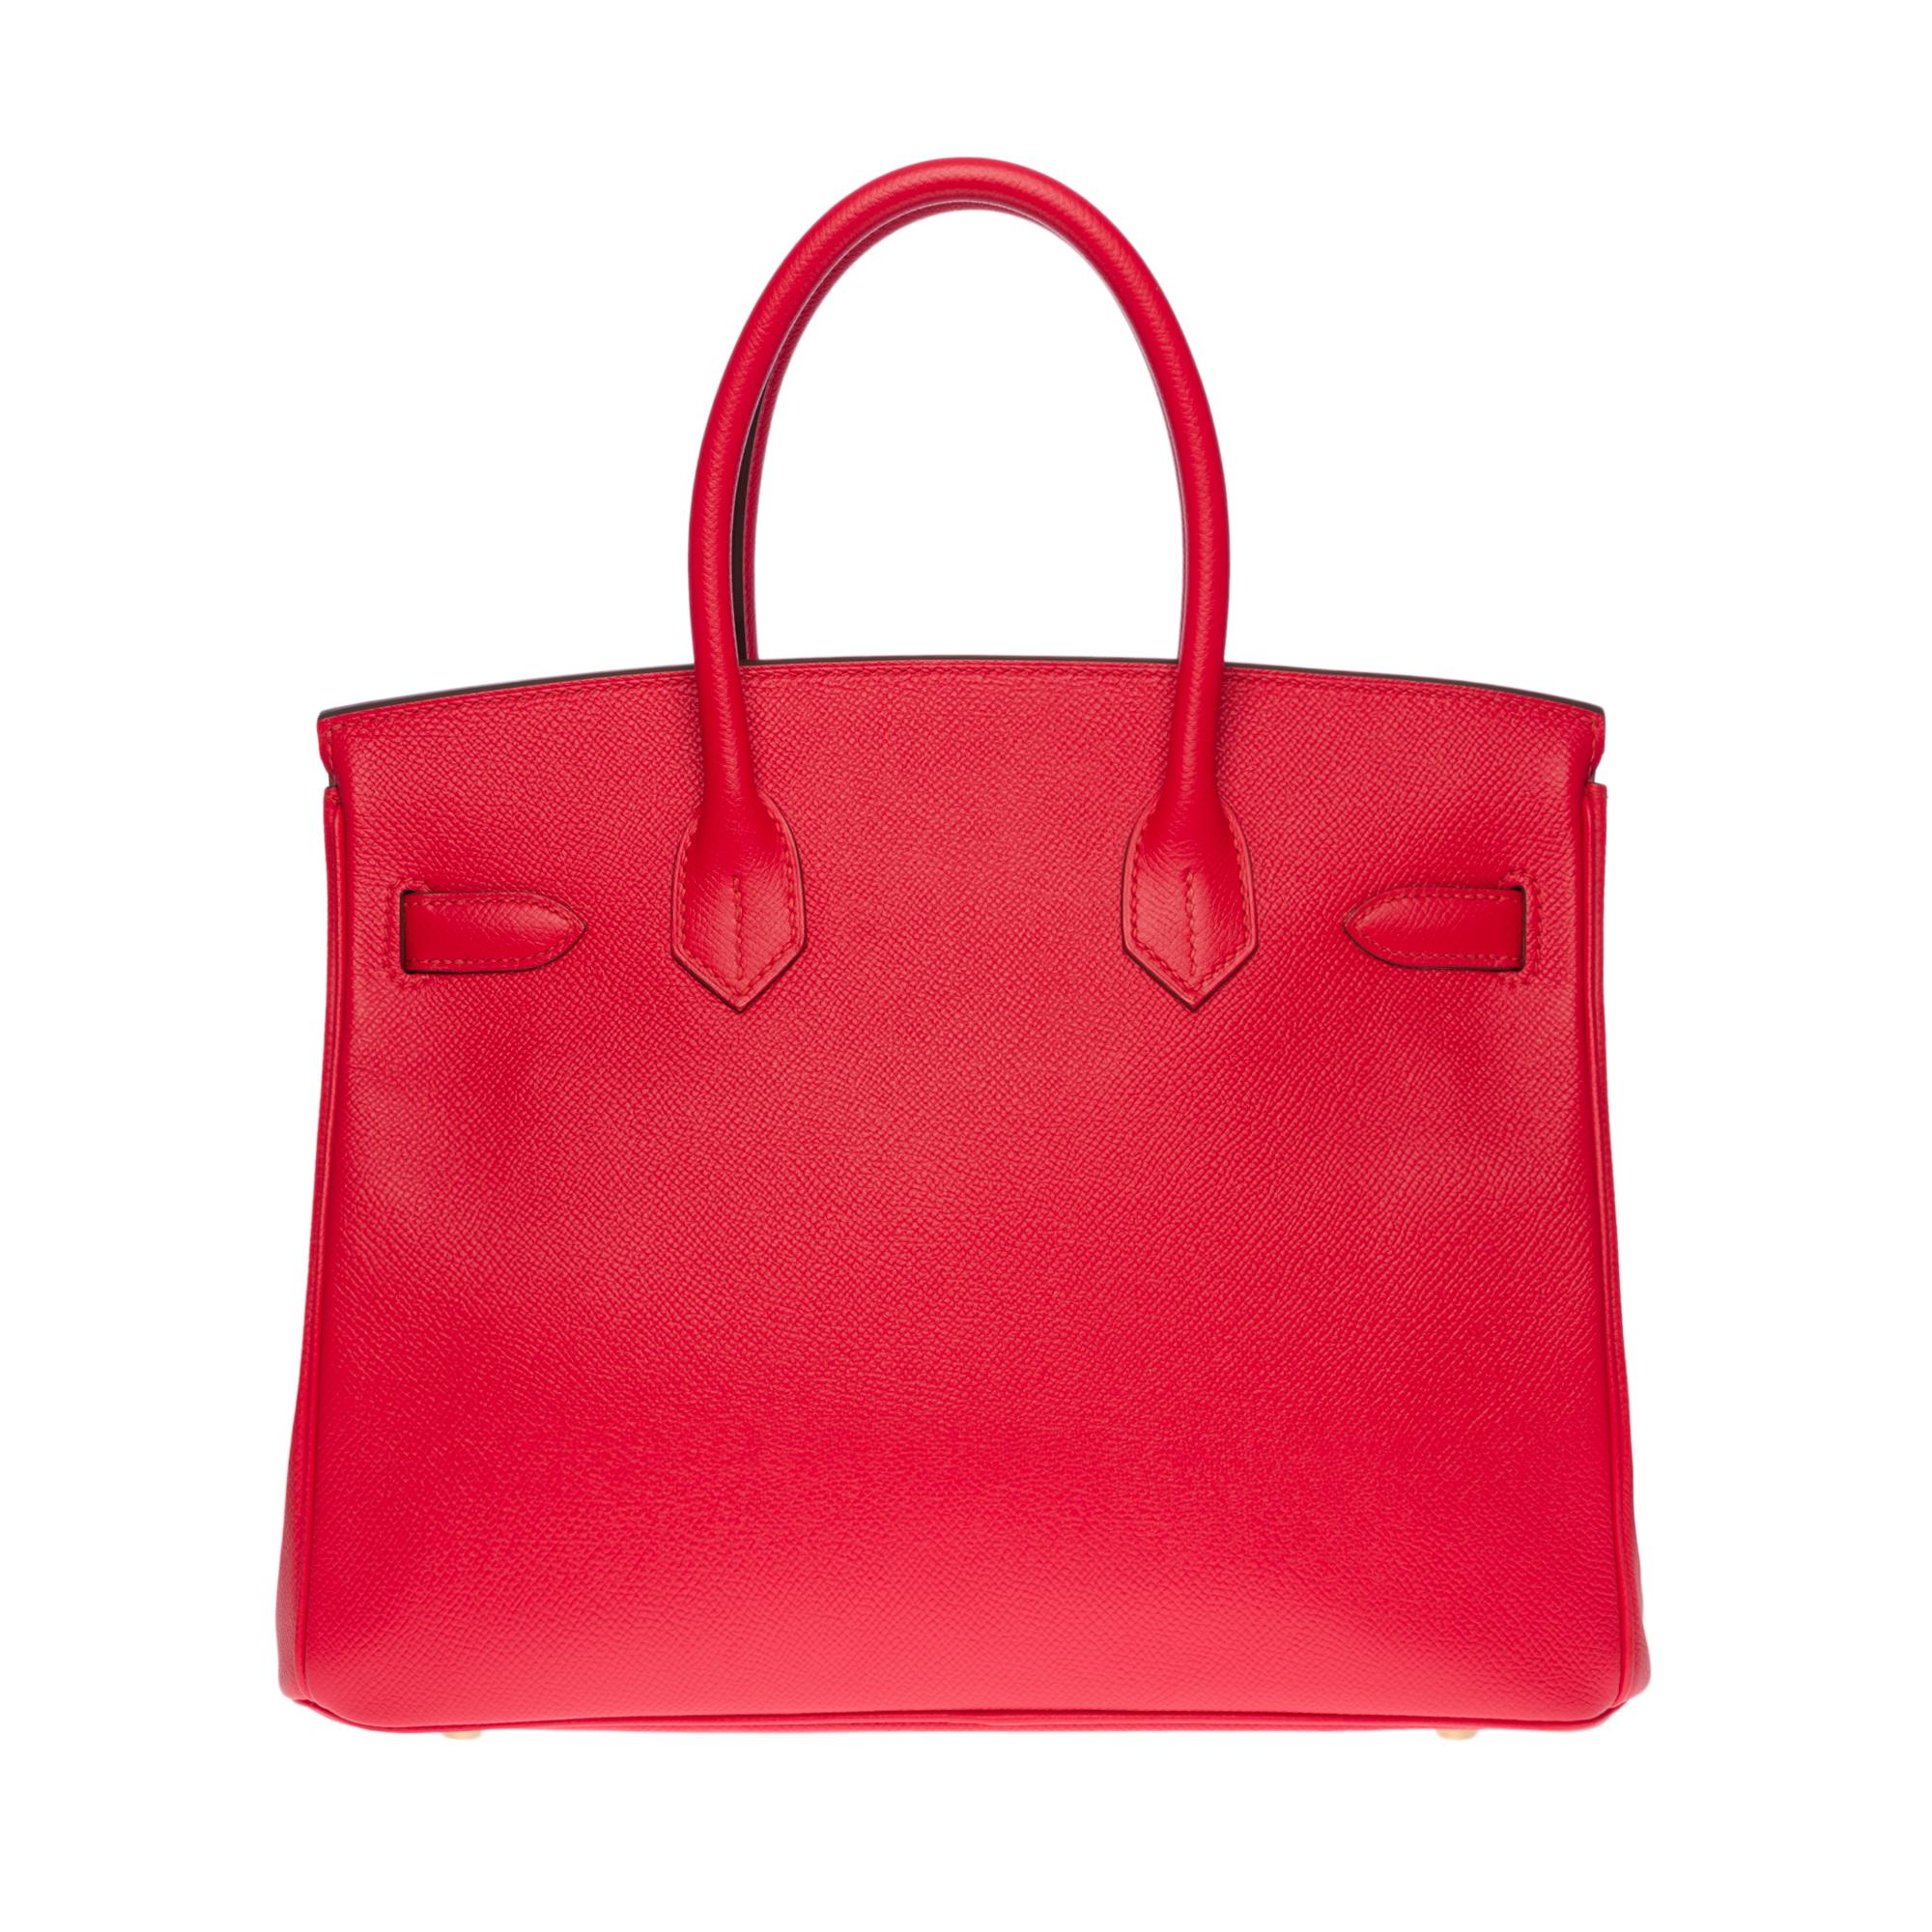 Exquisite and bright Hermes Birkin 30 handbag in Epsom Red Heart leather, gold-plated metal hardware, double handle in red leather allowing a hand carry

Flap closure
Red leather lining, one zippered pocket, one patch pocket
Signature: 